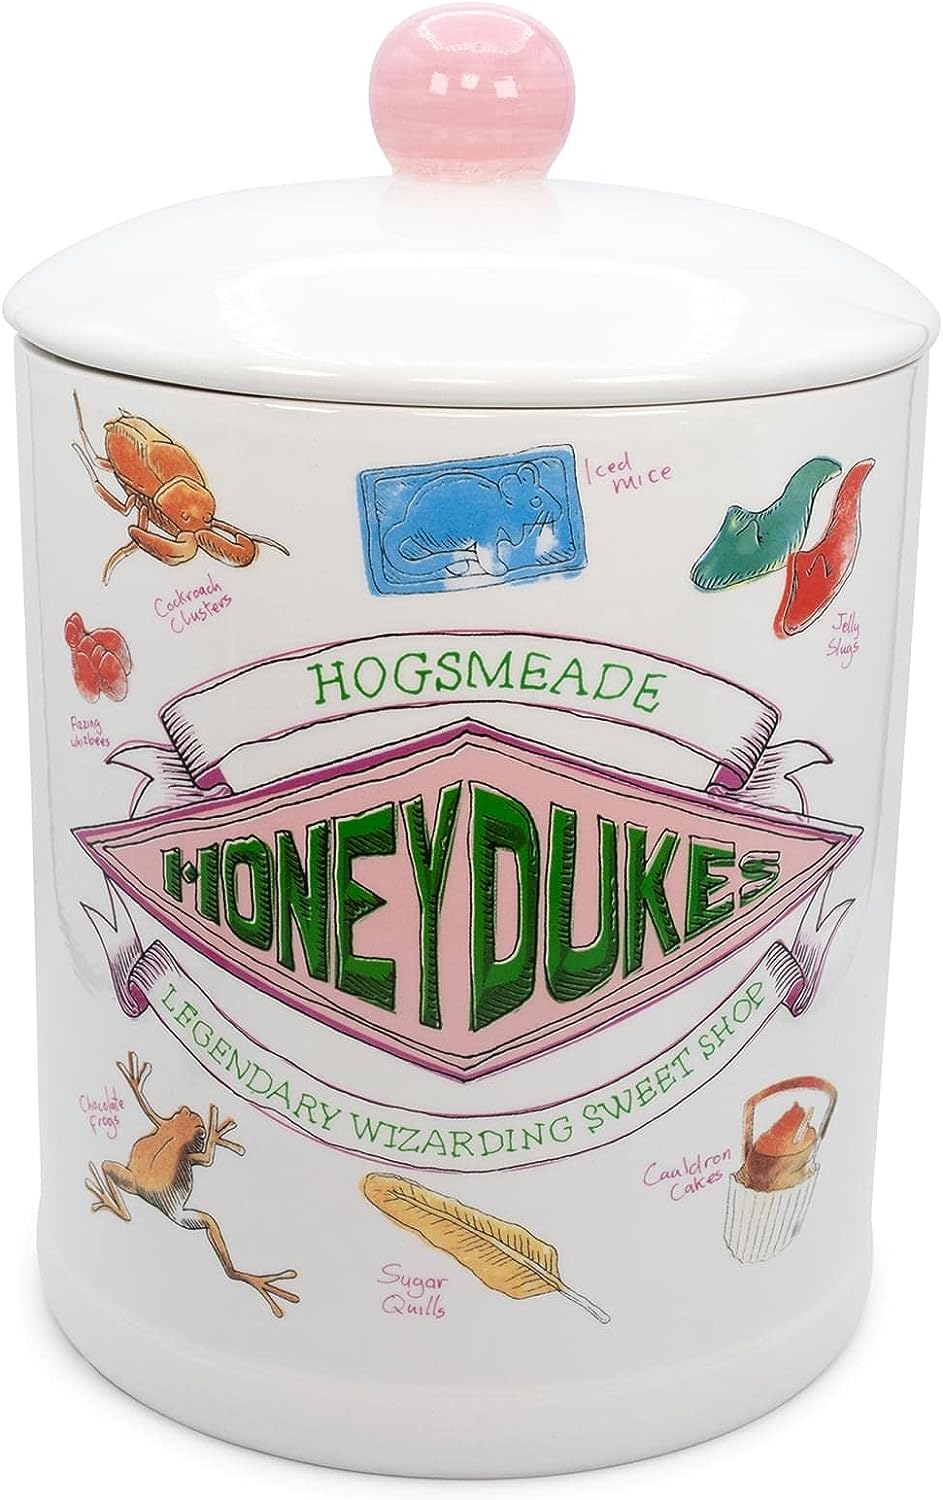 Harry Potter Honeydukes Sweets 10-Inch Ceramic Cookie Jar | Food Storage Jar For Candy, Spice | Flour and Sugar Containers With Lids, Home & Kitchen Canisters For Counter Top, Housewarming Gifts